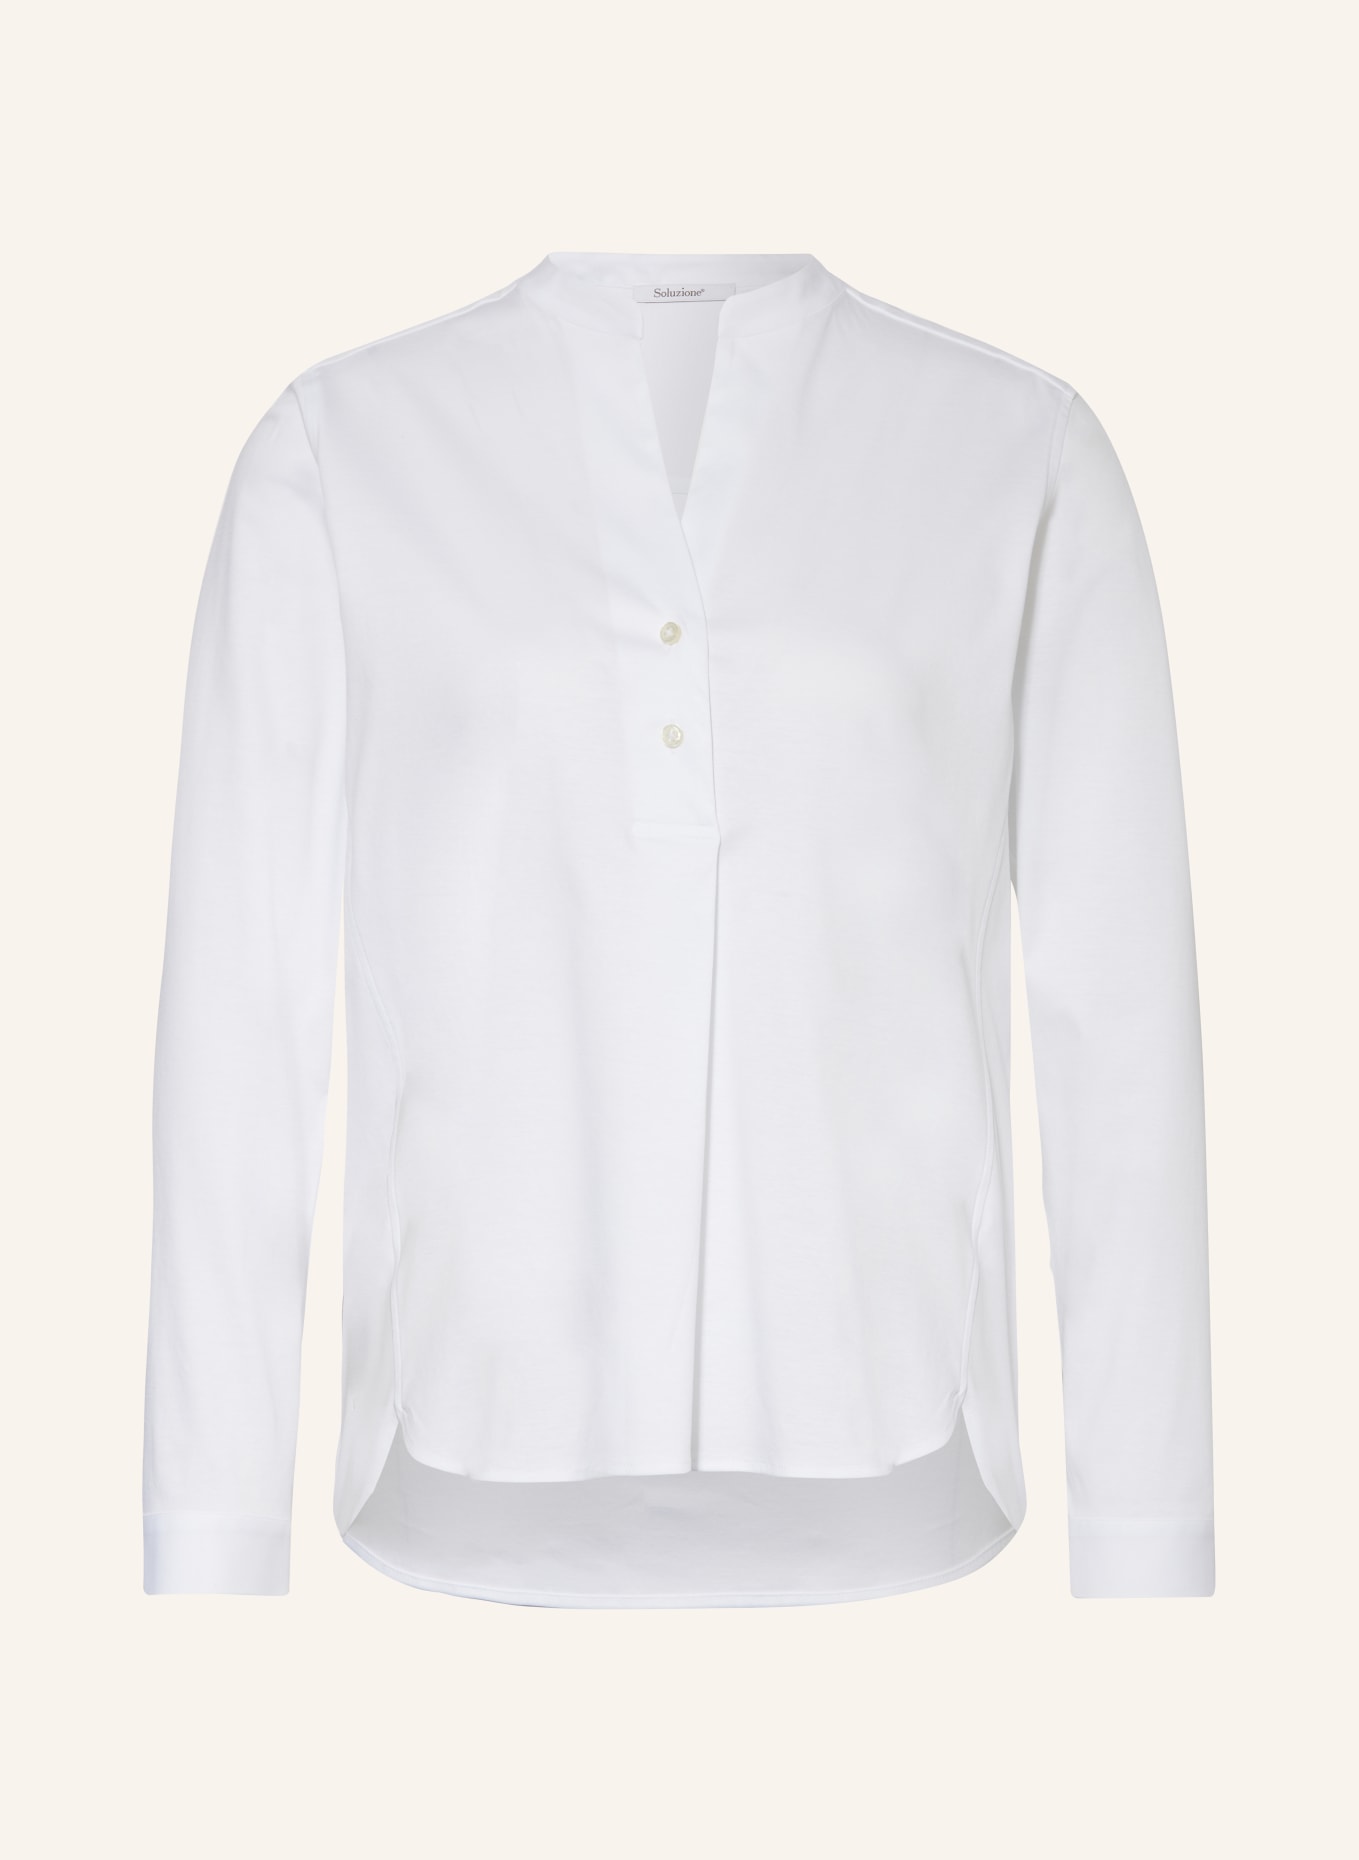 Soluzione Shirt blouse made of jersey, Color: WHITE (Image 1)